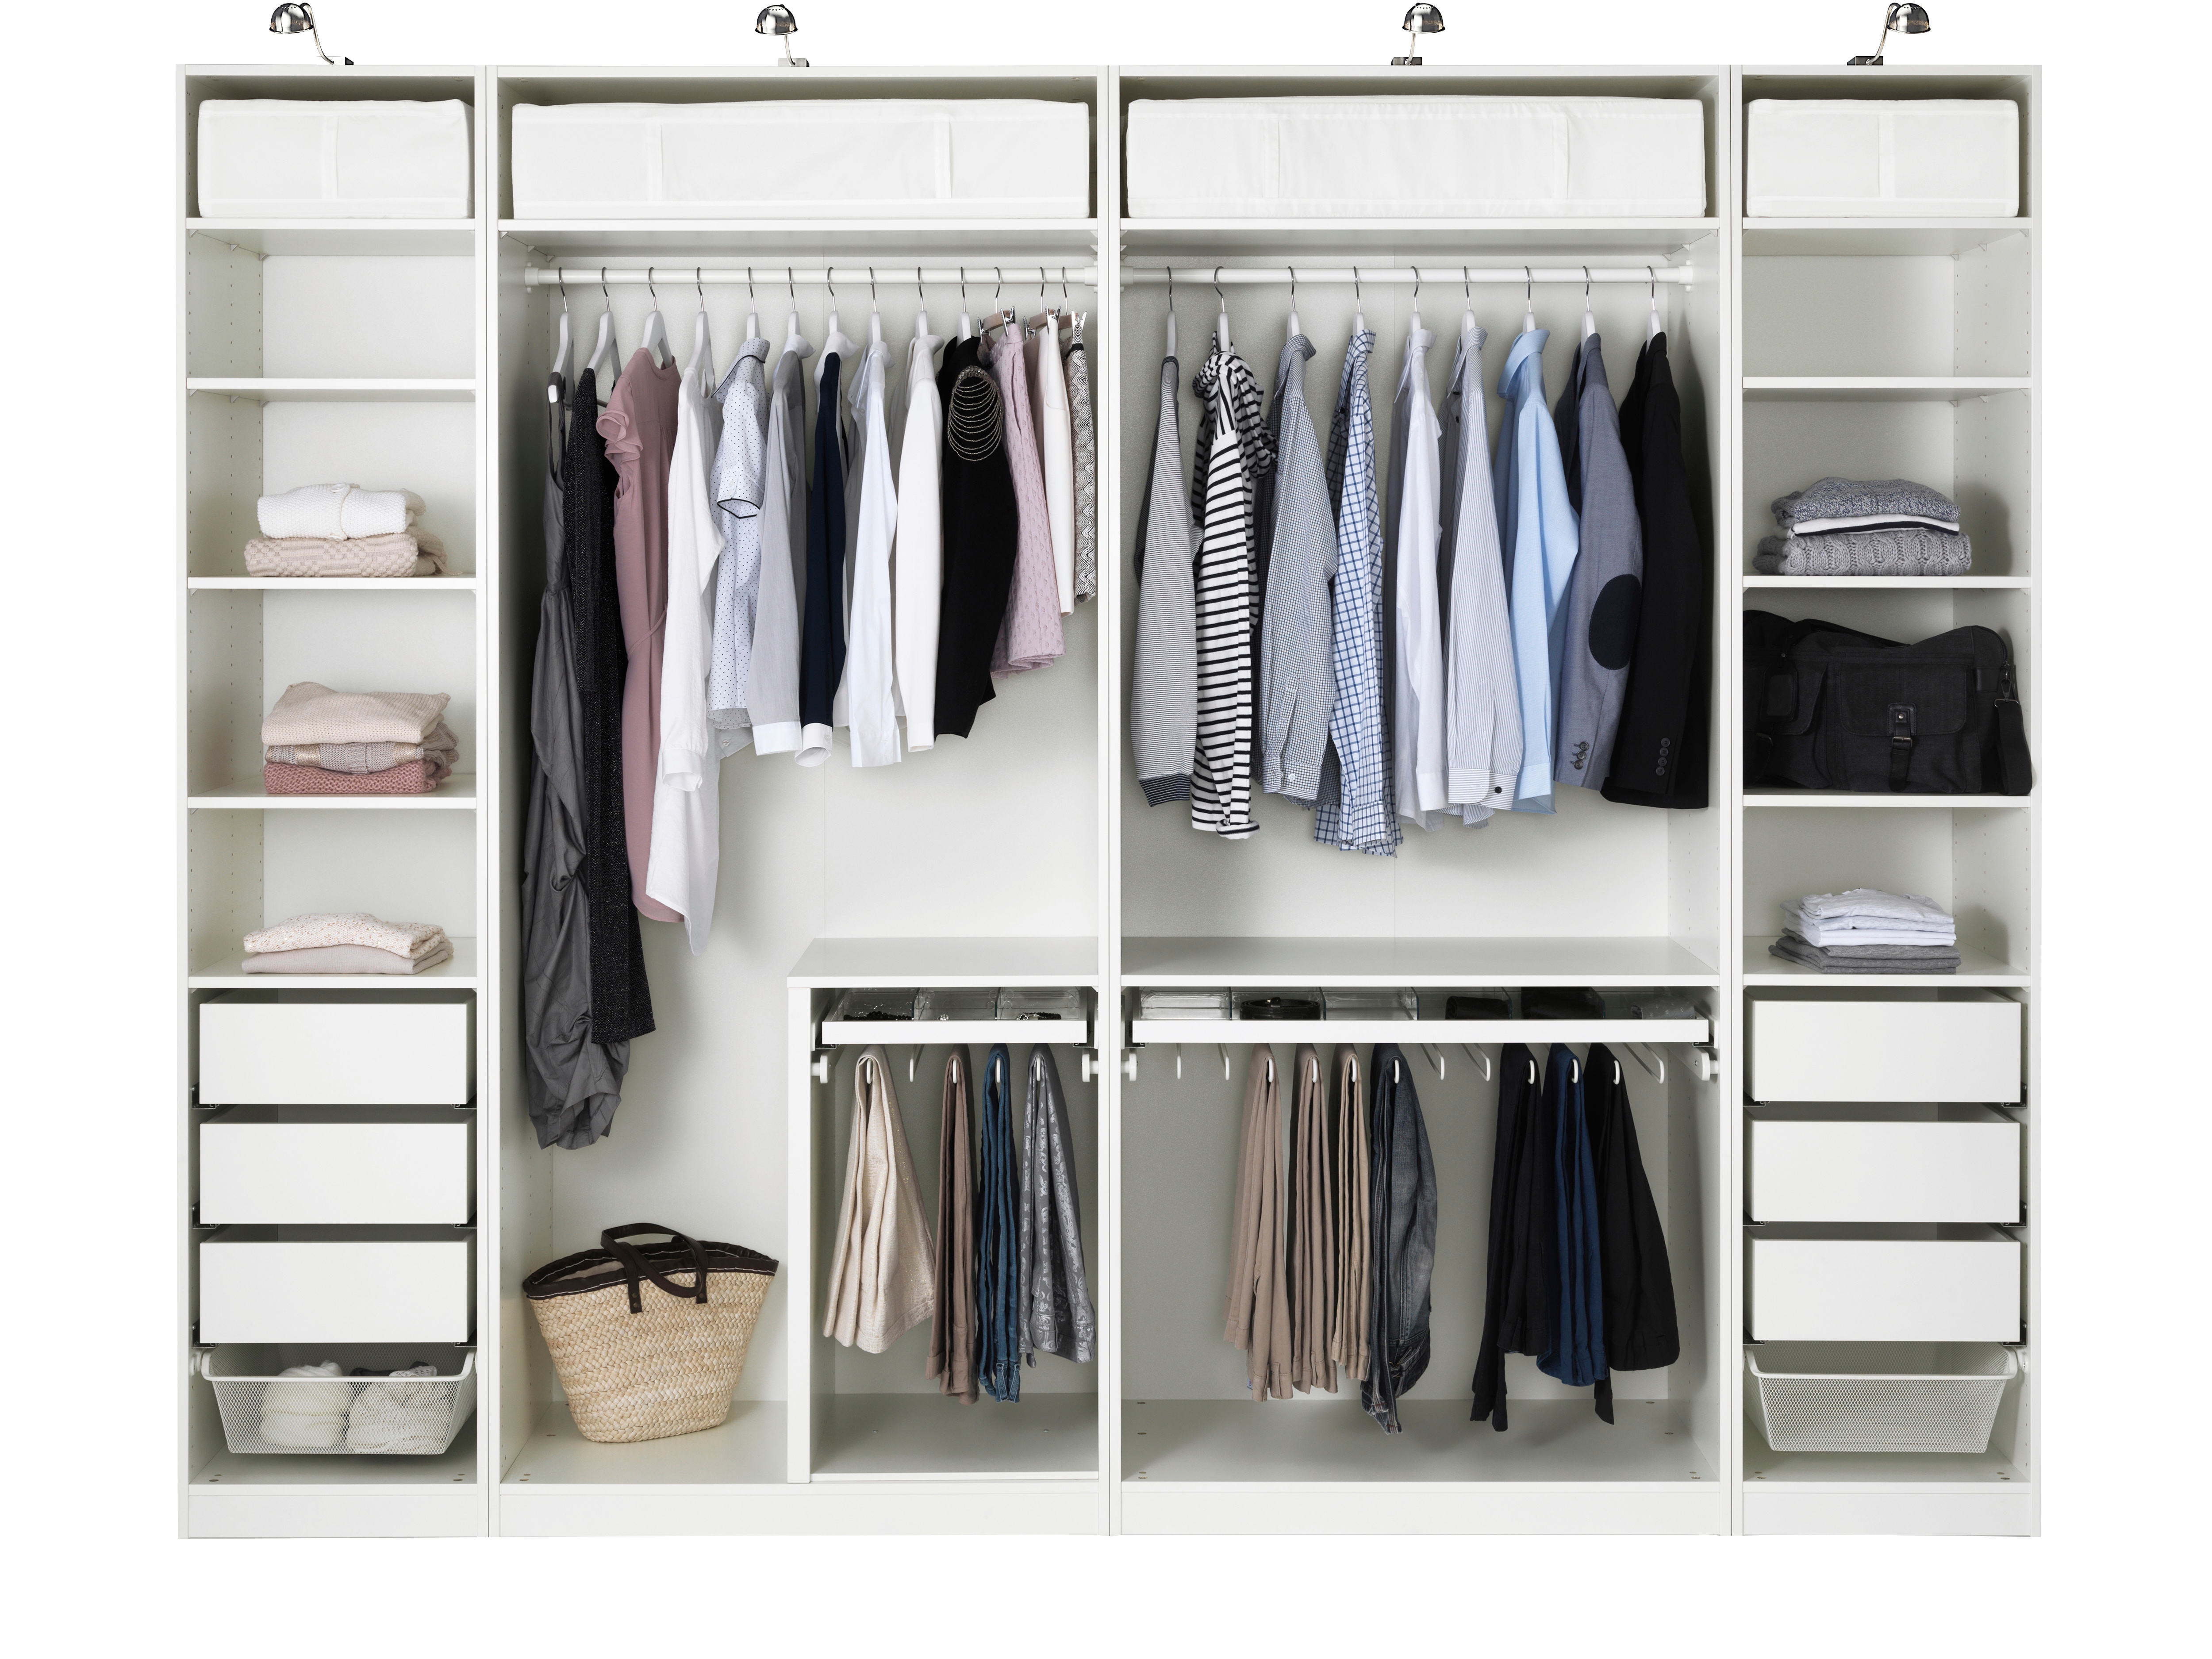 A white PAX wardrobe with various shirts and pants hanging in it